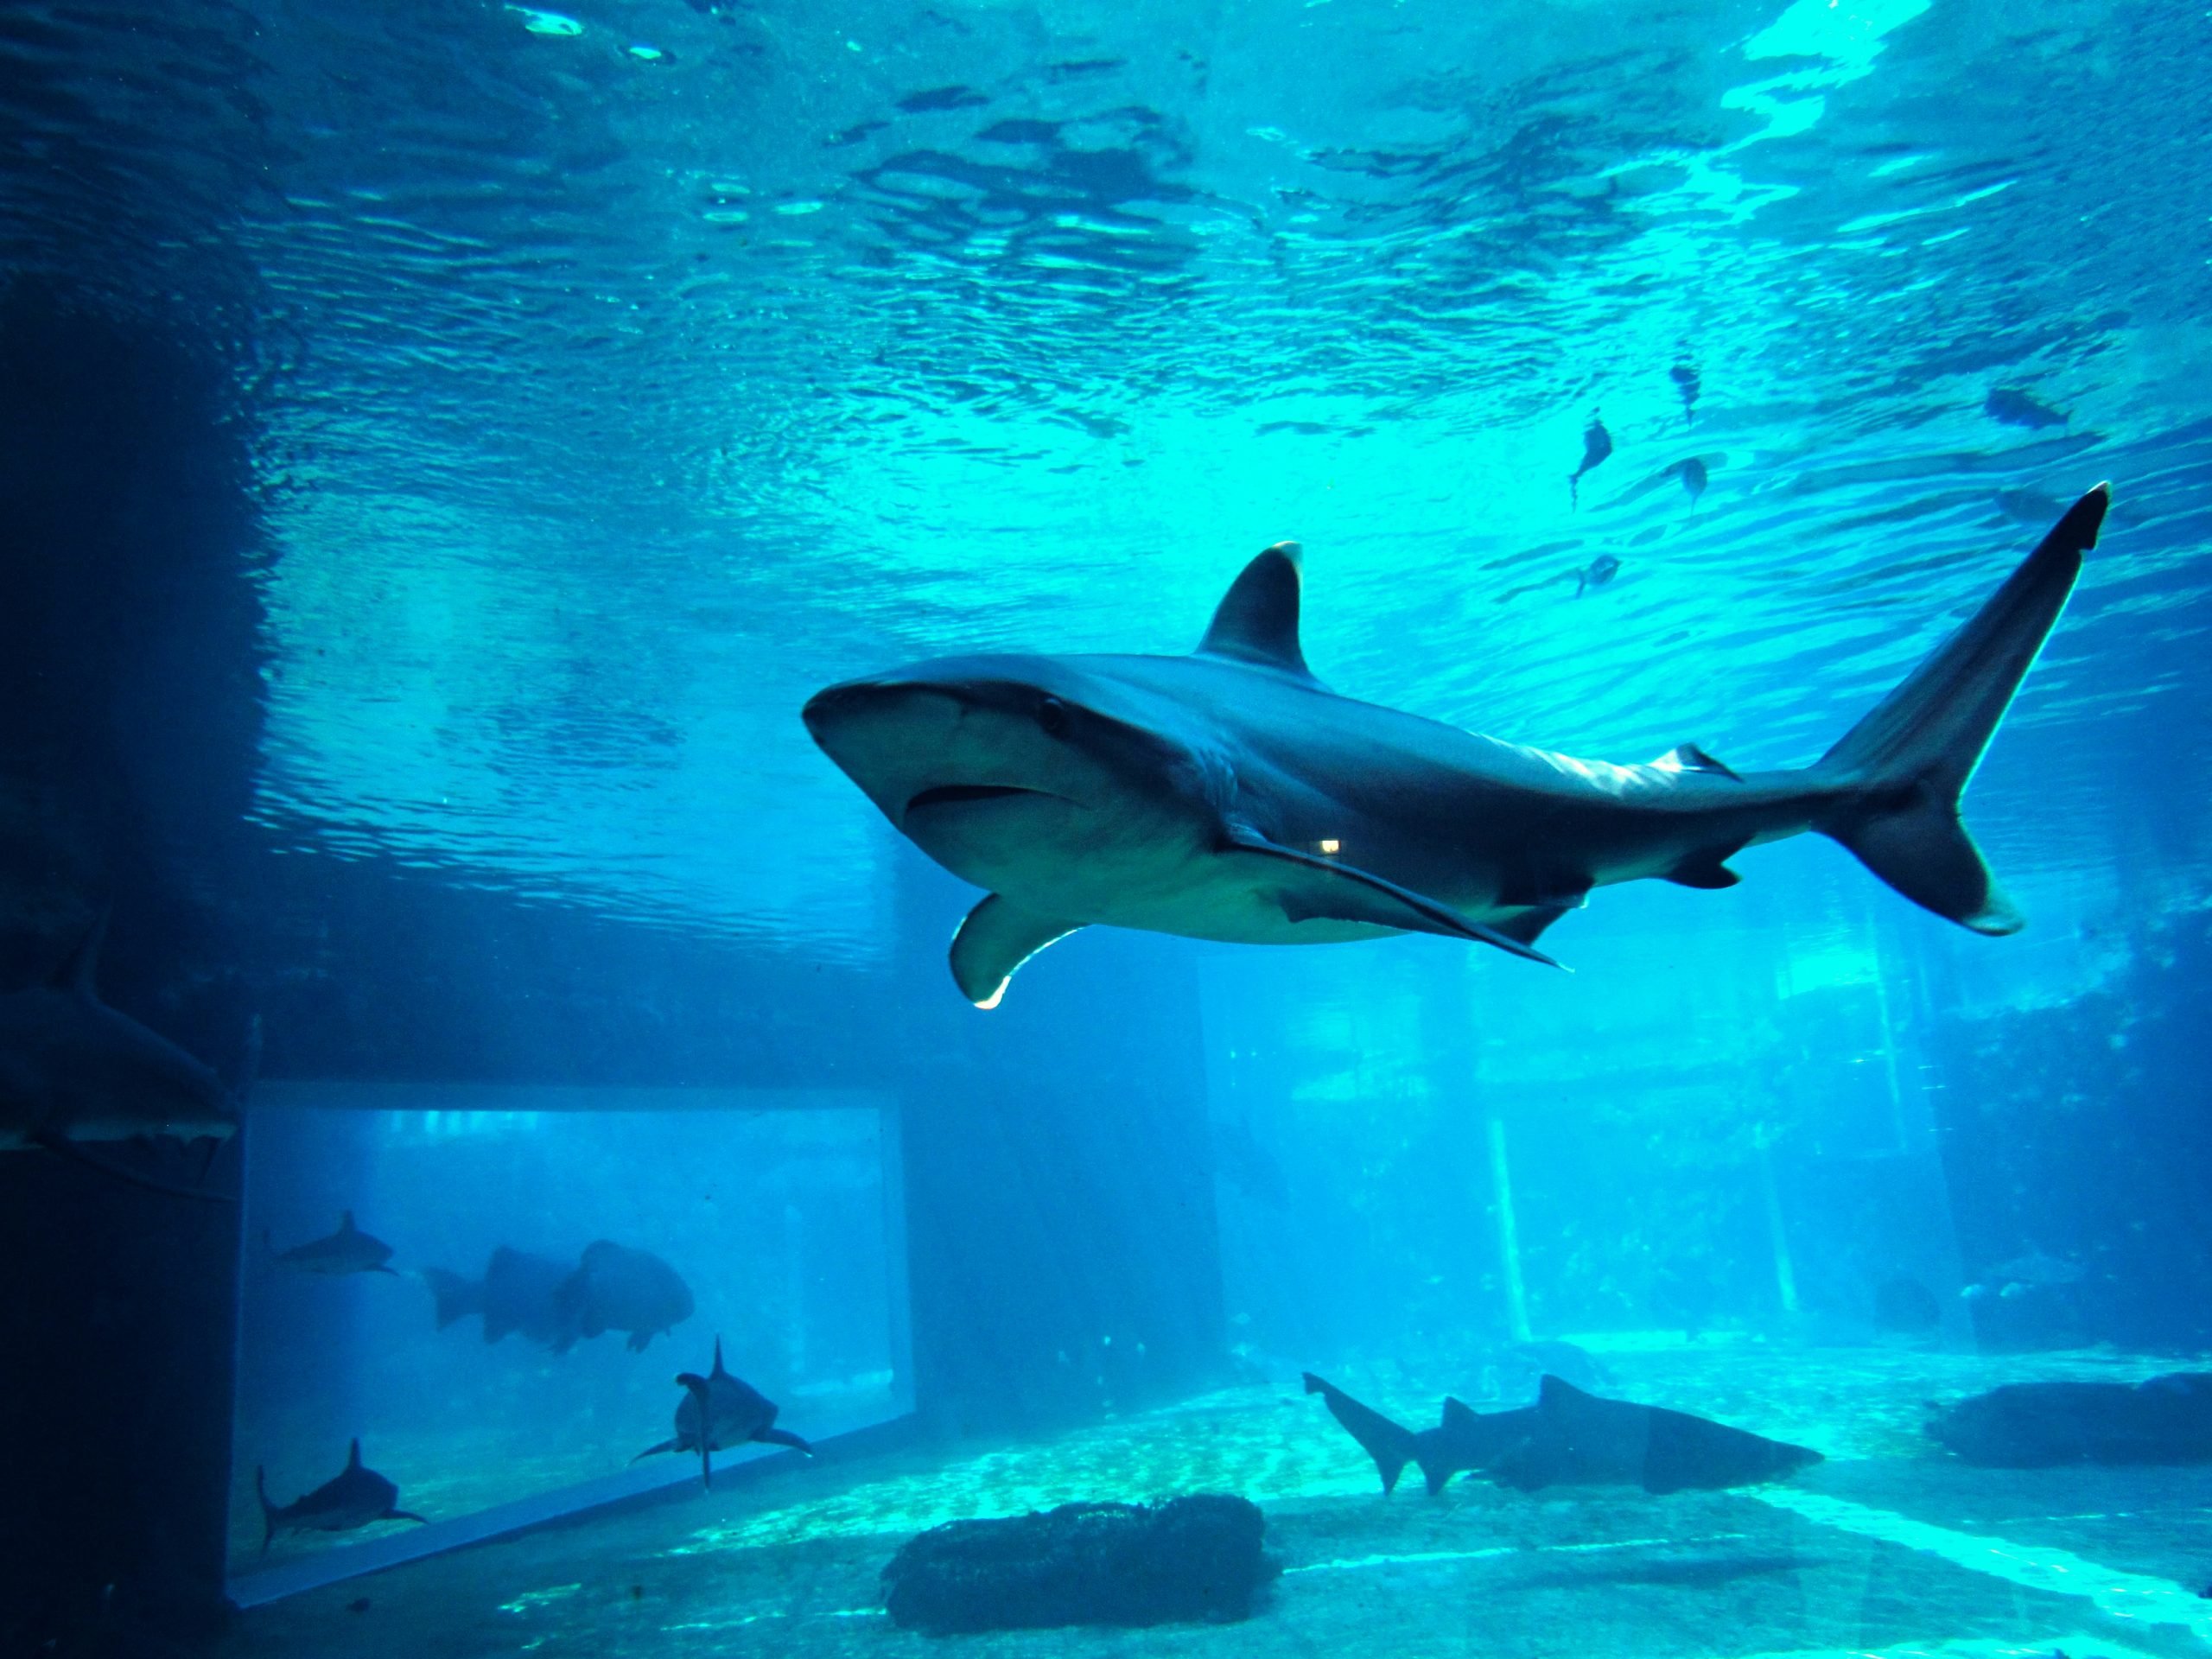 A picture of a shark from the Shark Encounters attraction